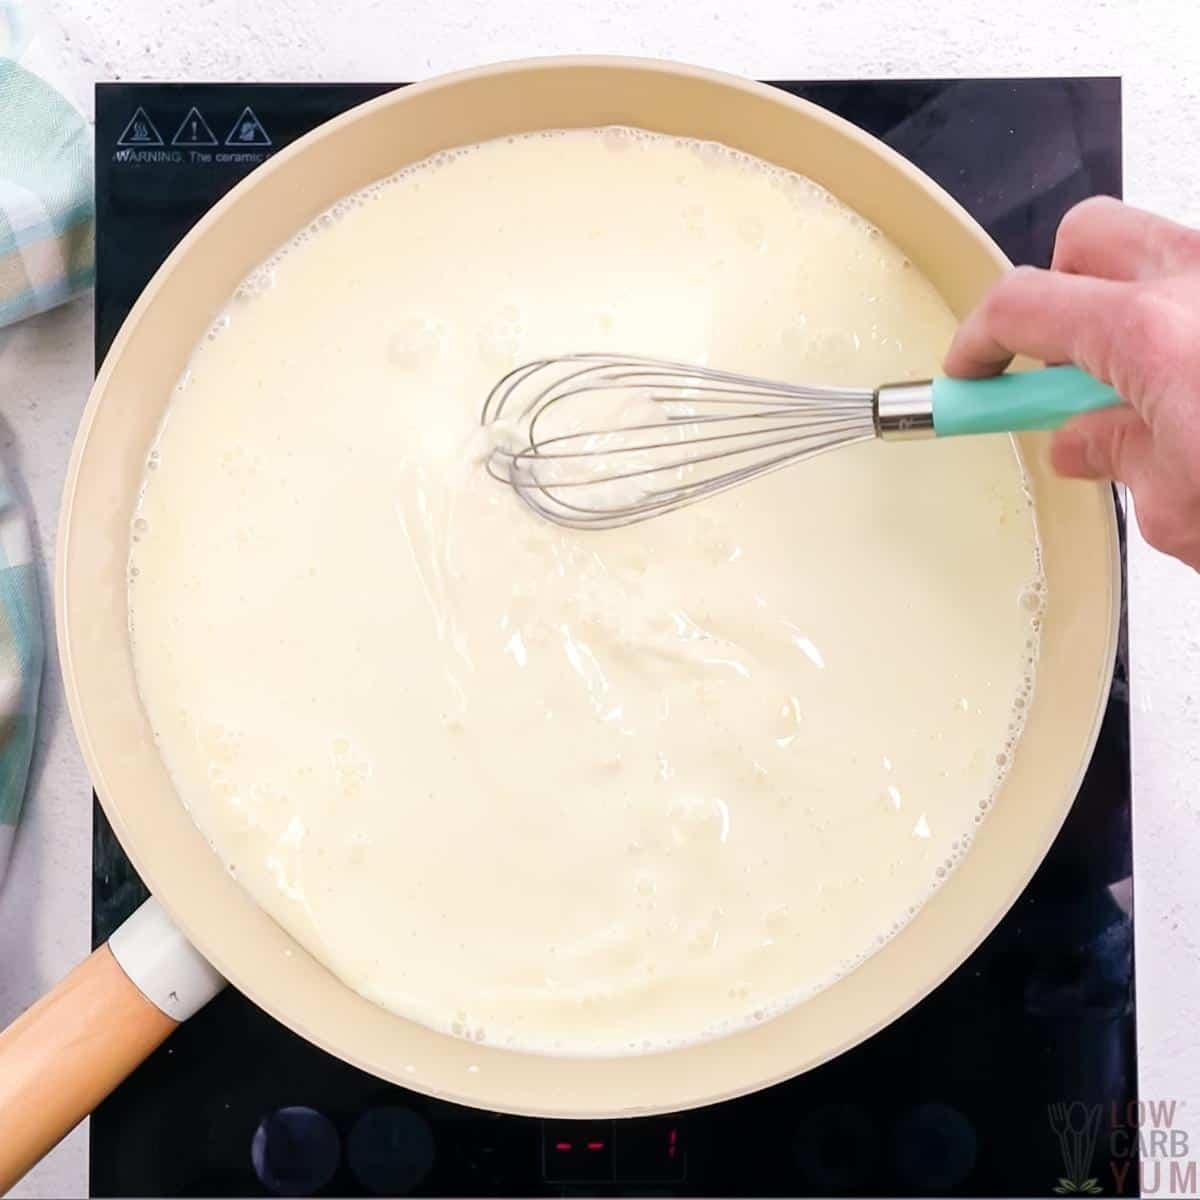 whisking ingredients together in pan on cooktop.